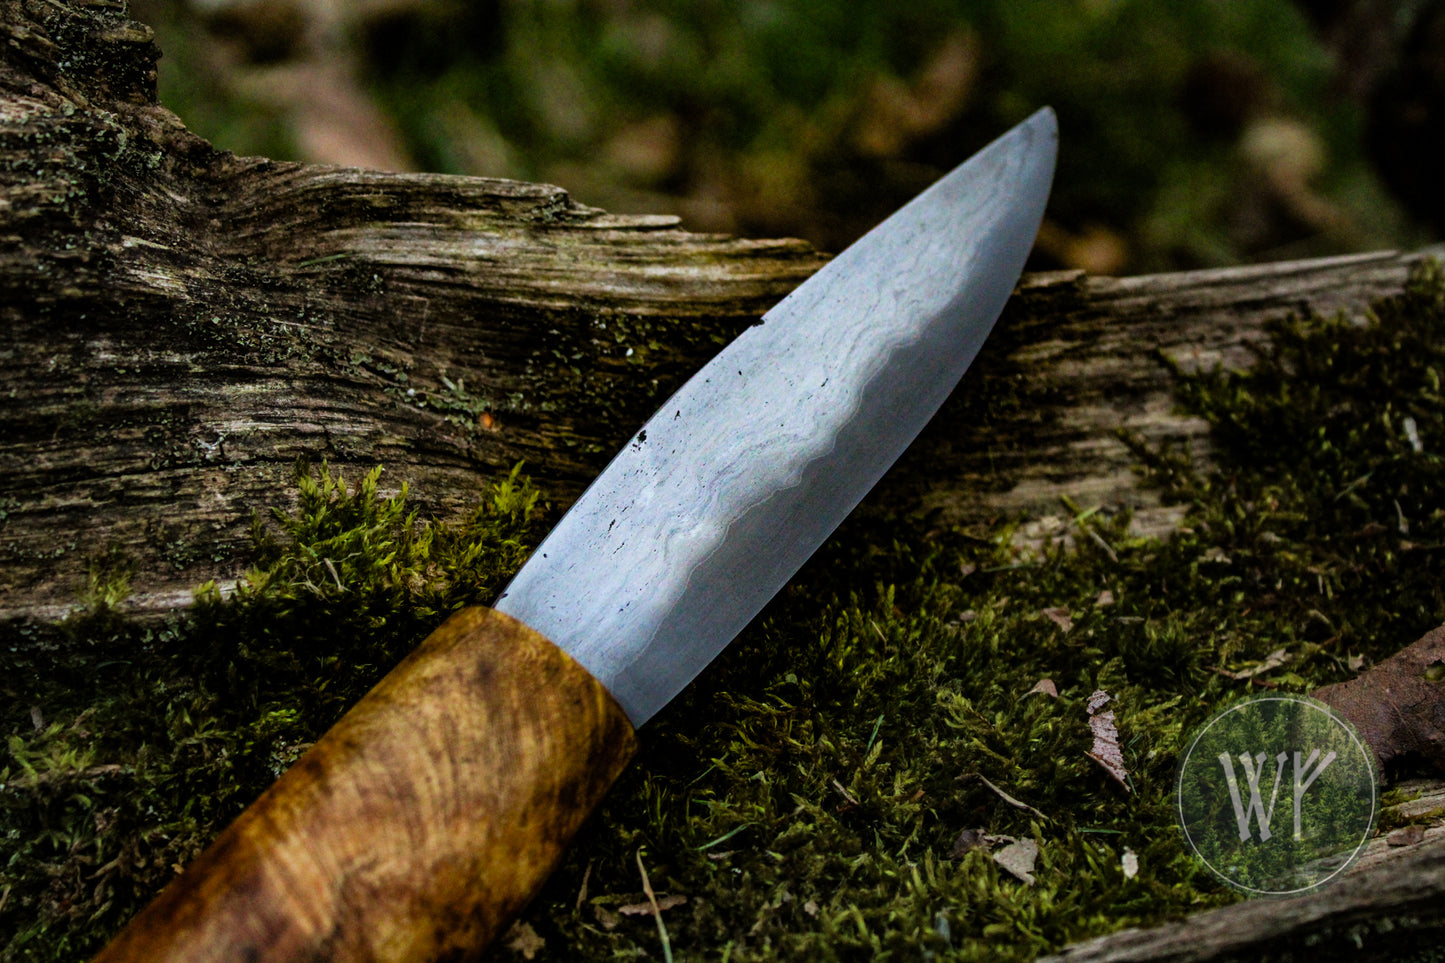 [RESERVED FOR NORTHERN TEXTILES] Reproduction of Trollsteinhøe Reindeer Hunter Knife / Iron Age Scandinavian Knife / Spalted Birch Burr Handle / Laminated wrought iron & steel blade